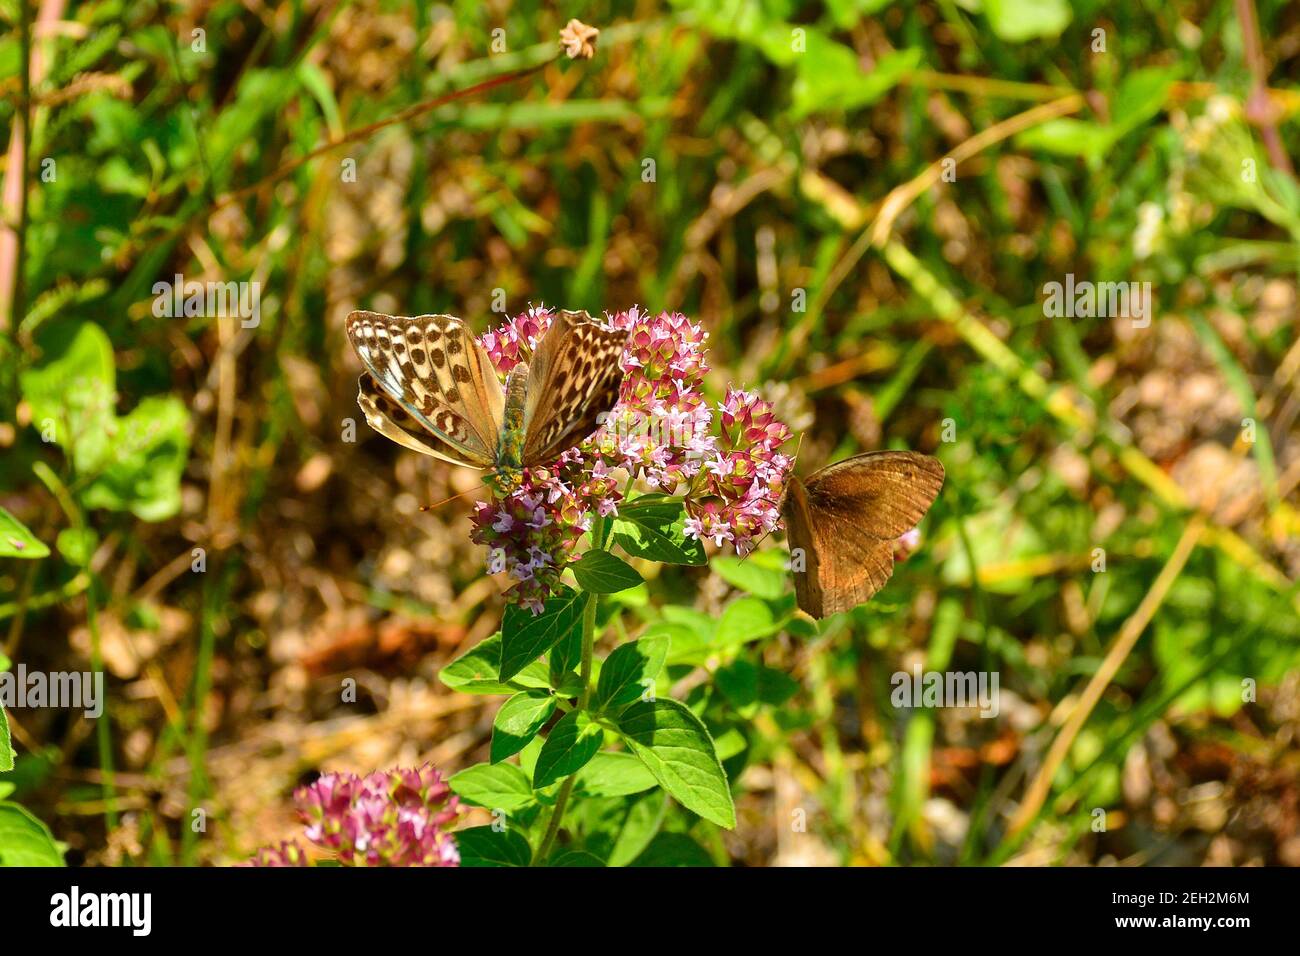 A female Silver Washed Fritillary Butterfly in north east Italy. They are on the flowers of the perrenial herb Asclepias Syriaca, AKA Common Milk Weed Stock Photo